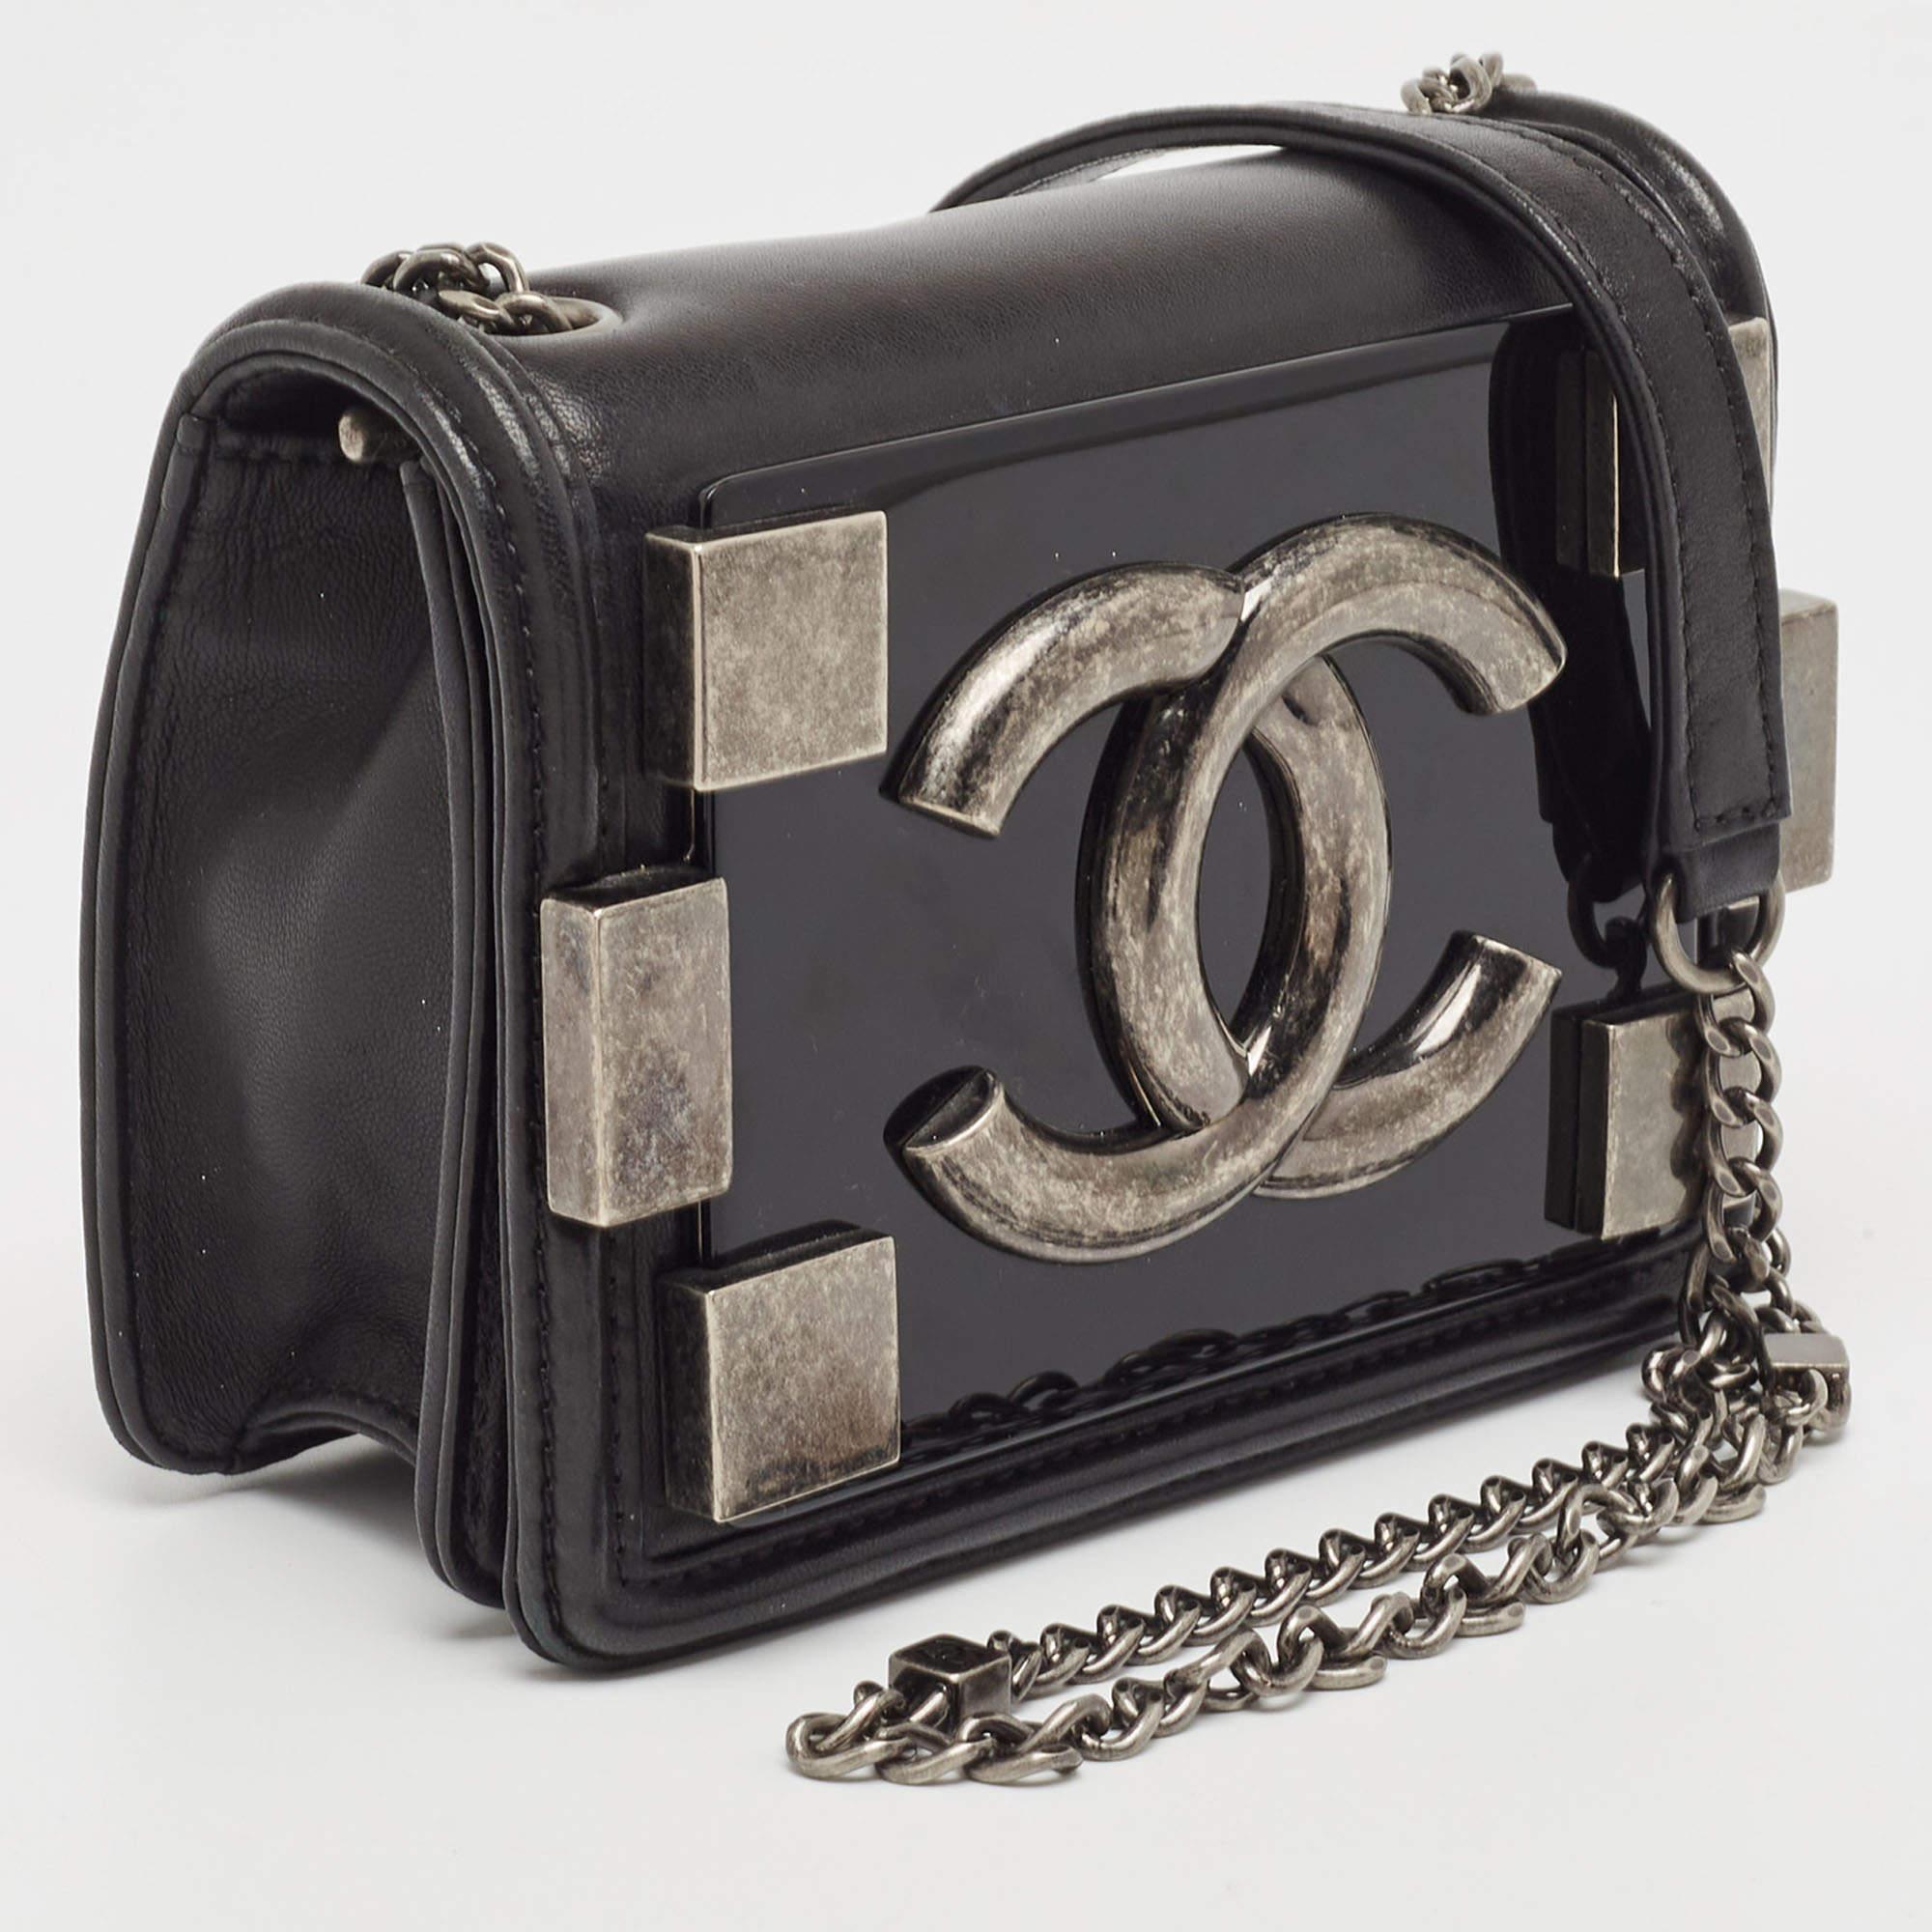 The Chanel Brick Flap Crossbody Bag is a chic accessory that seamlessly blends classic elegance with modern design. Crafted from luxurious black leather and adorned with a sleek plexiglass panel, it features a compact silhouette, a flap closure, and